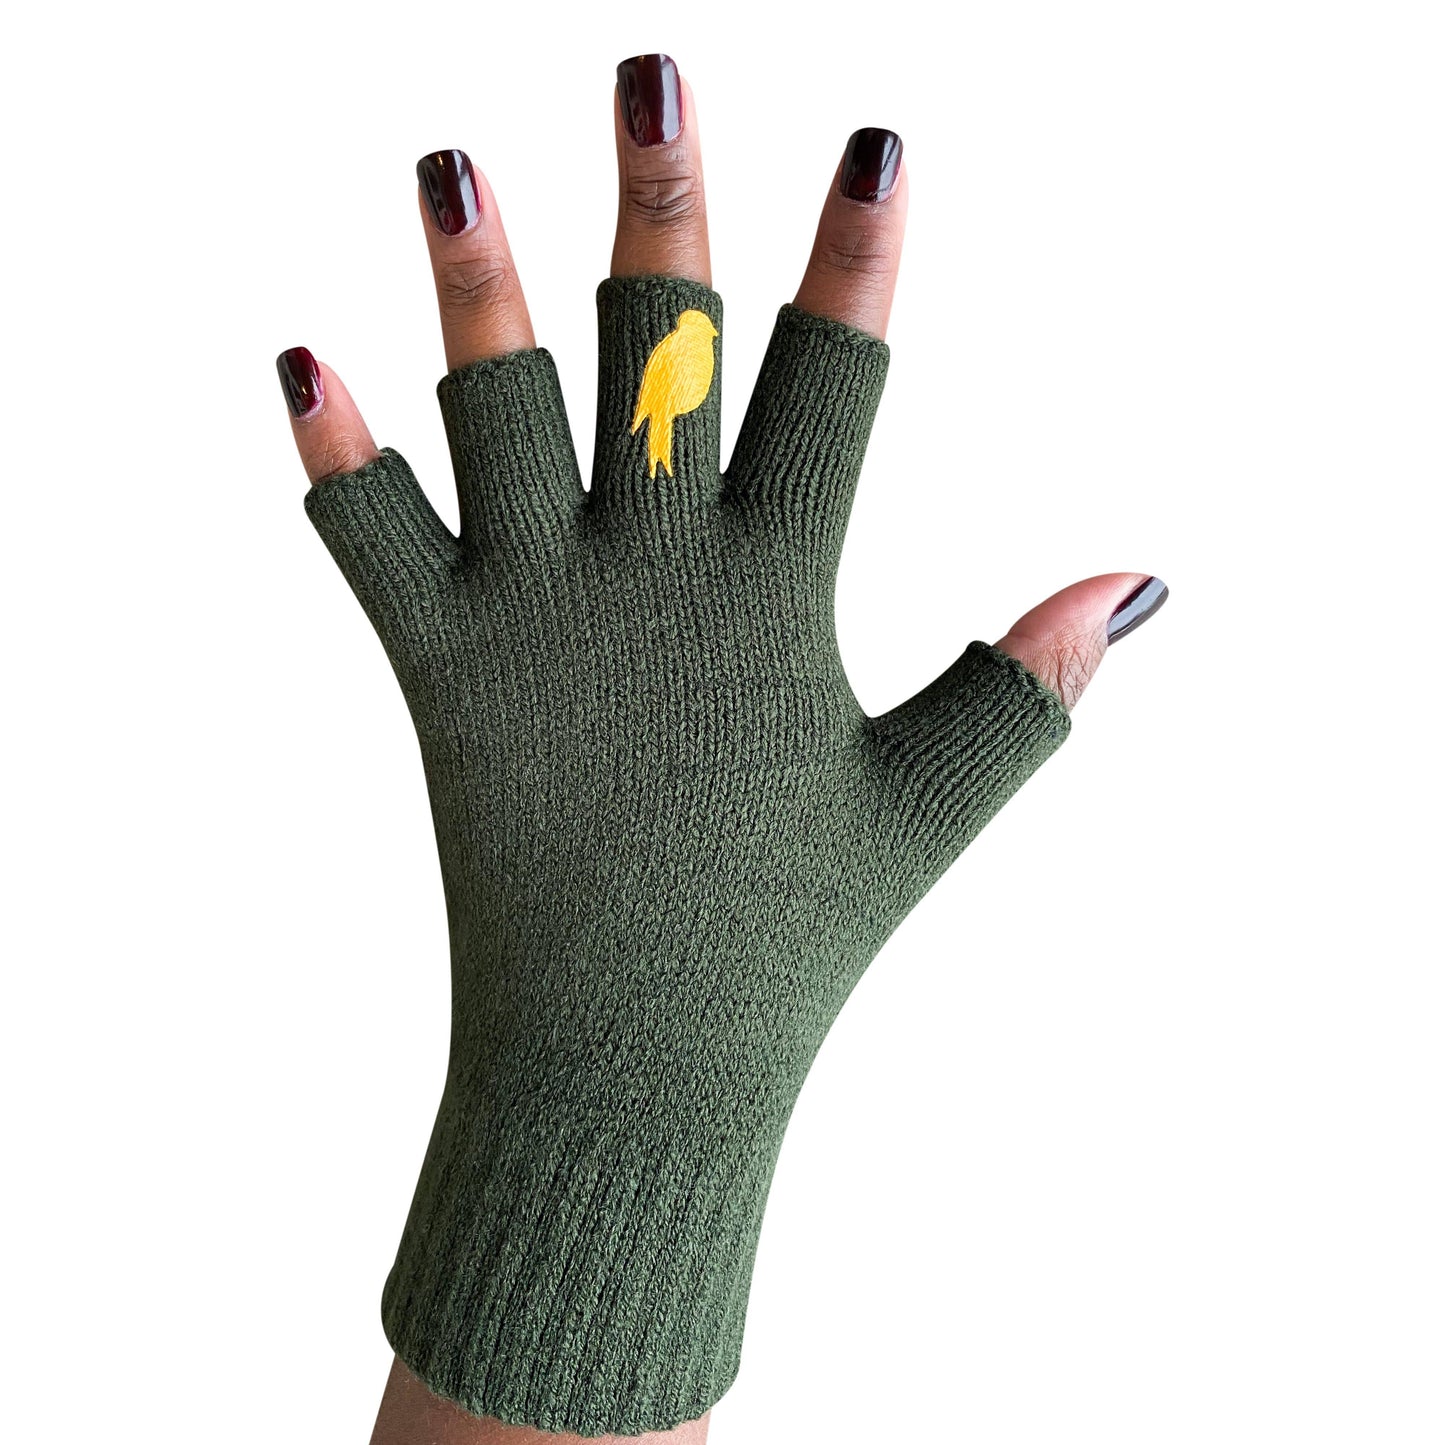 the forest green fingerless gloves with mustard bird on the middle digit shown on a model's hand